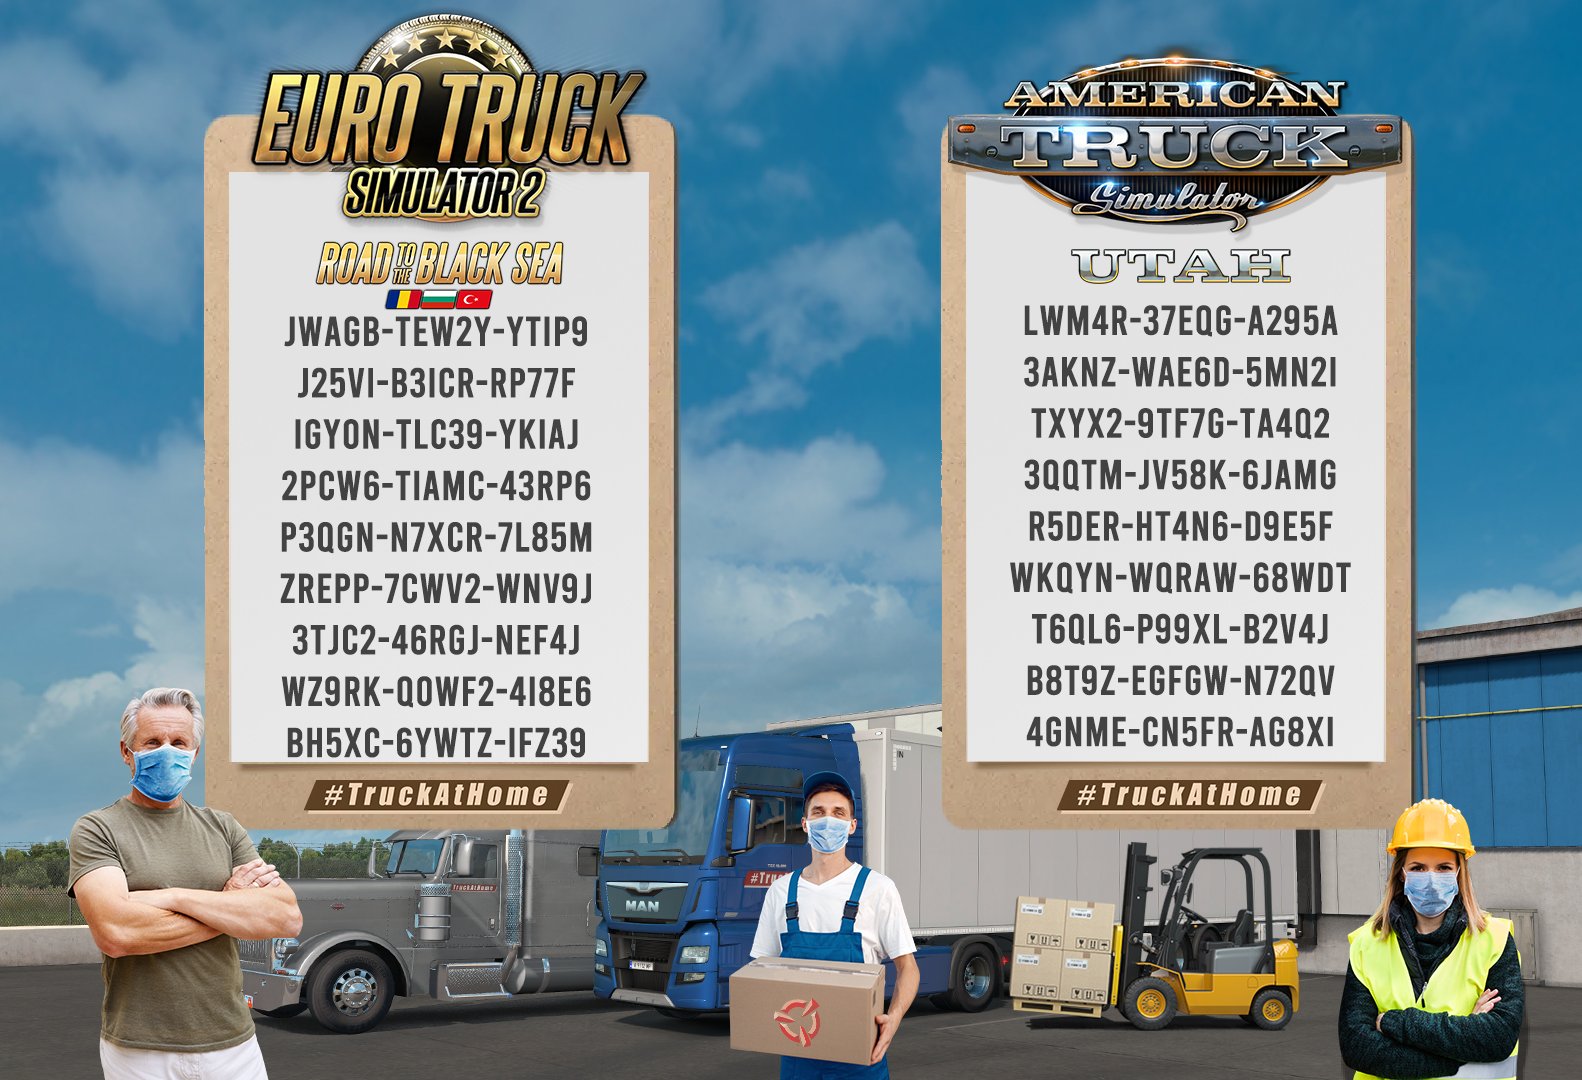 Scs Software 480 000 000 Milestone Reached We Re Getting Close To A Big Number Of 500 You Guys Are Awesome Stay Home Stay Safe Truckathome Grab Yourself A Key And